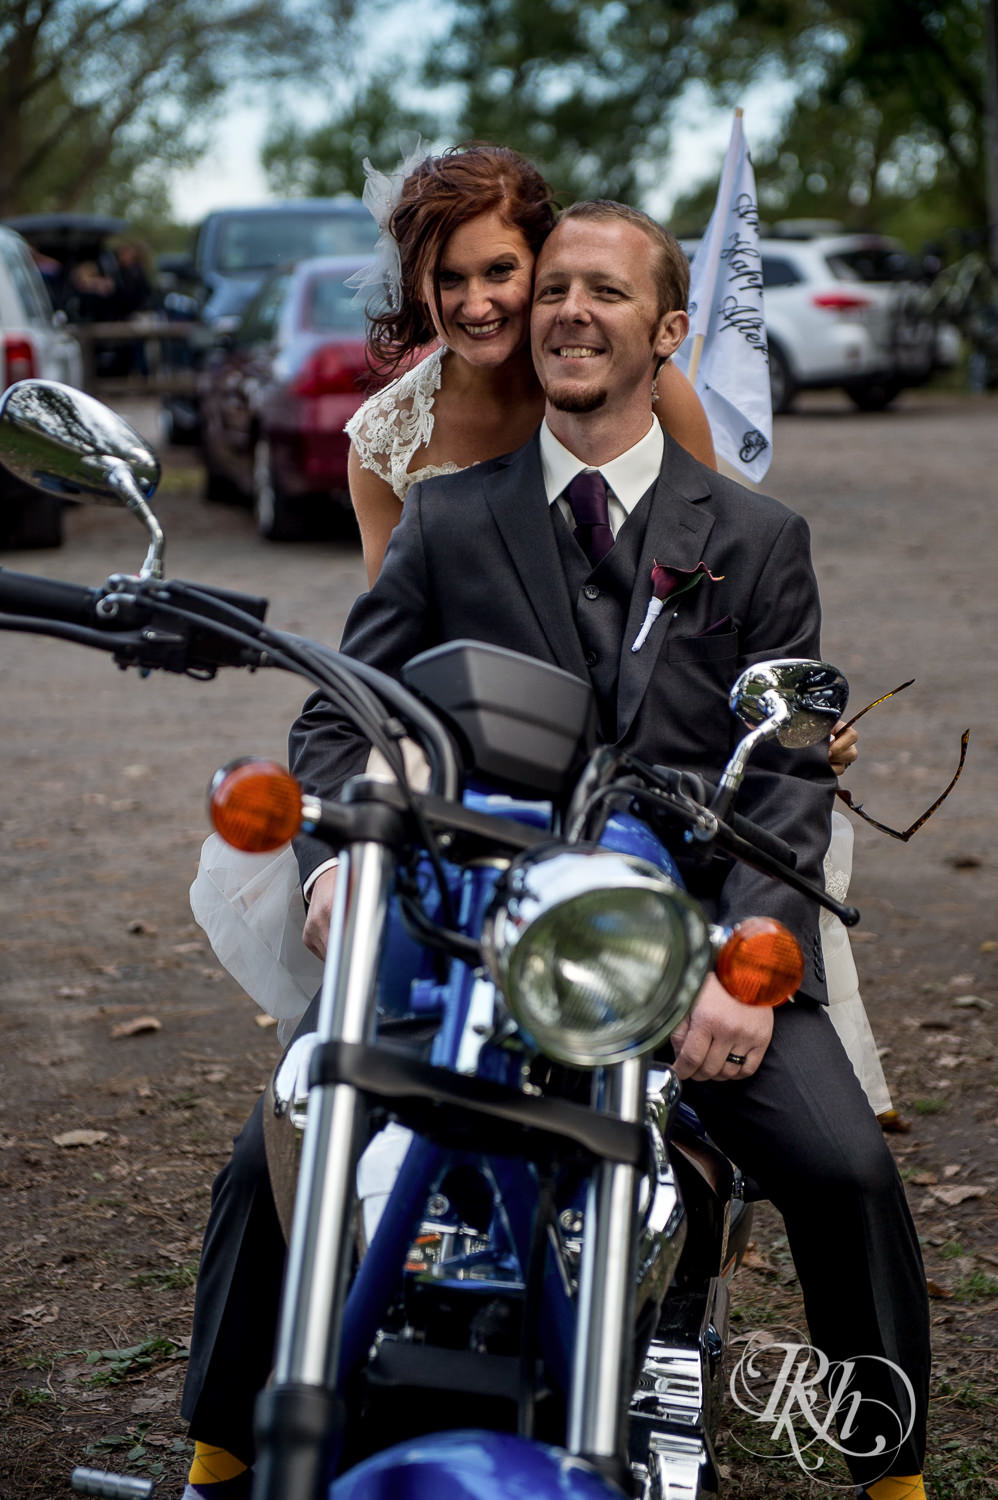 Bride and groom ride on motorcycle on wedding day at park in White Bear Lake, Minnesota.